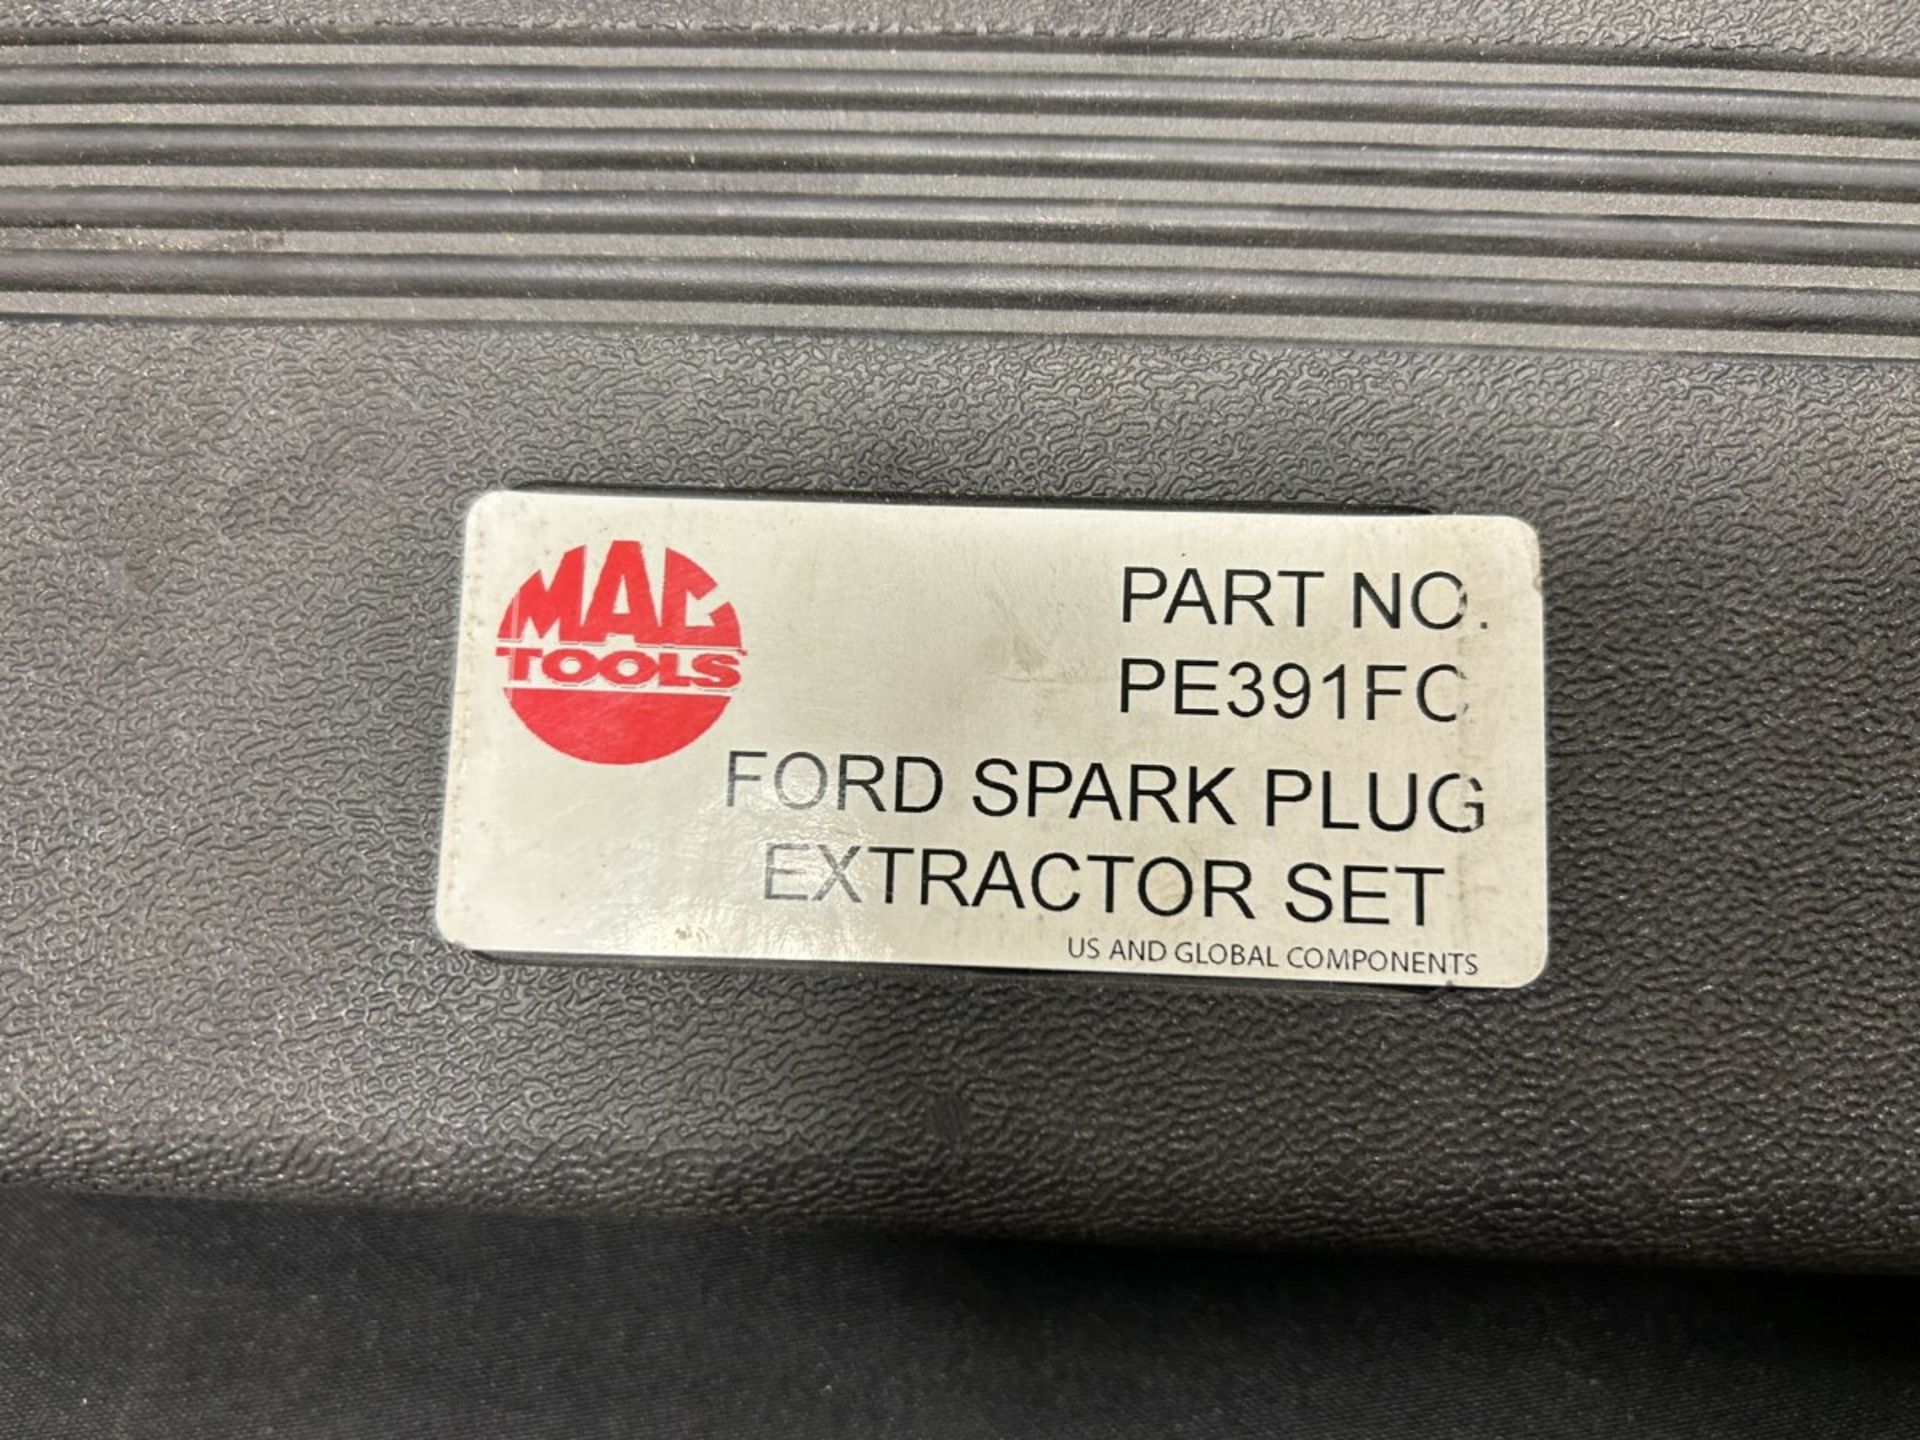 MAC TOOLS FORD SPARK PLUG EXTRACTOR SET - PART NO. PE391FC - Image 3 of 3